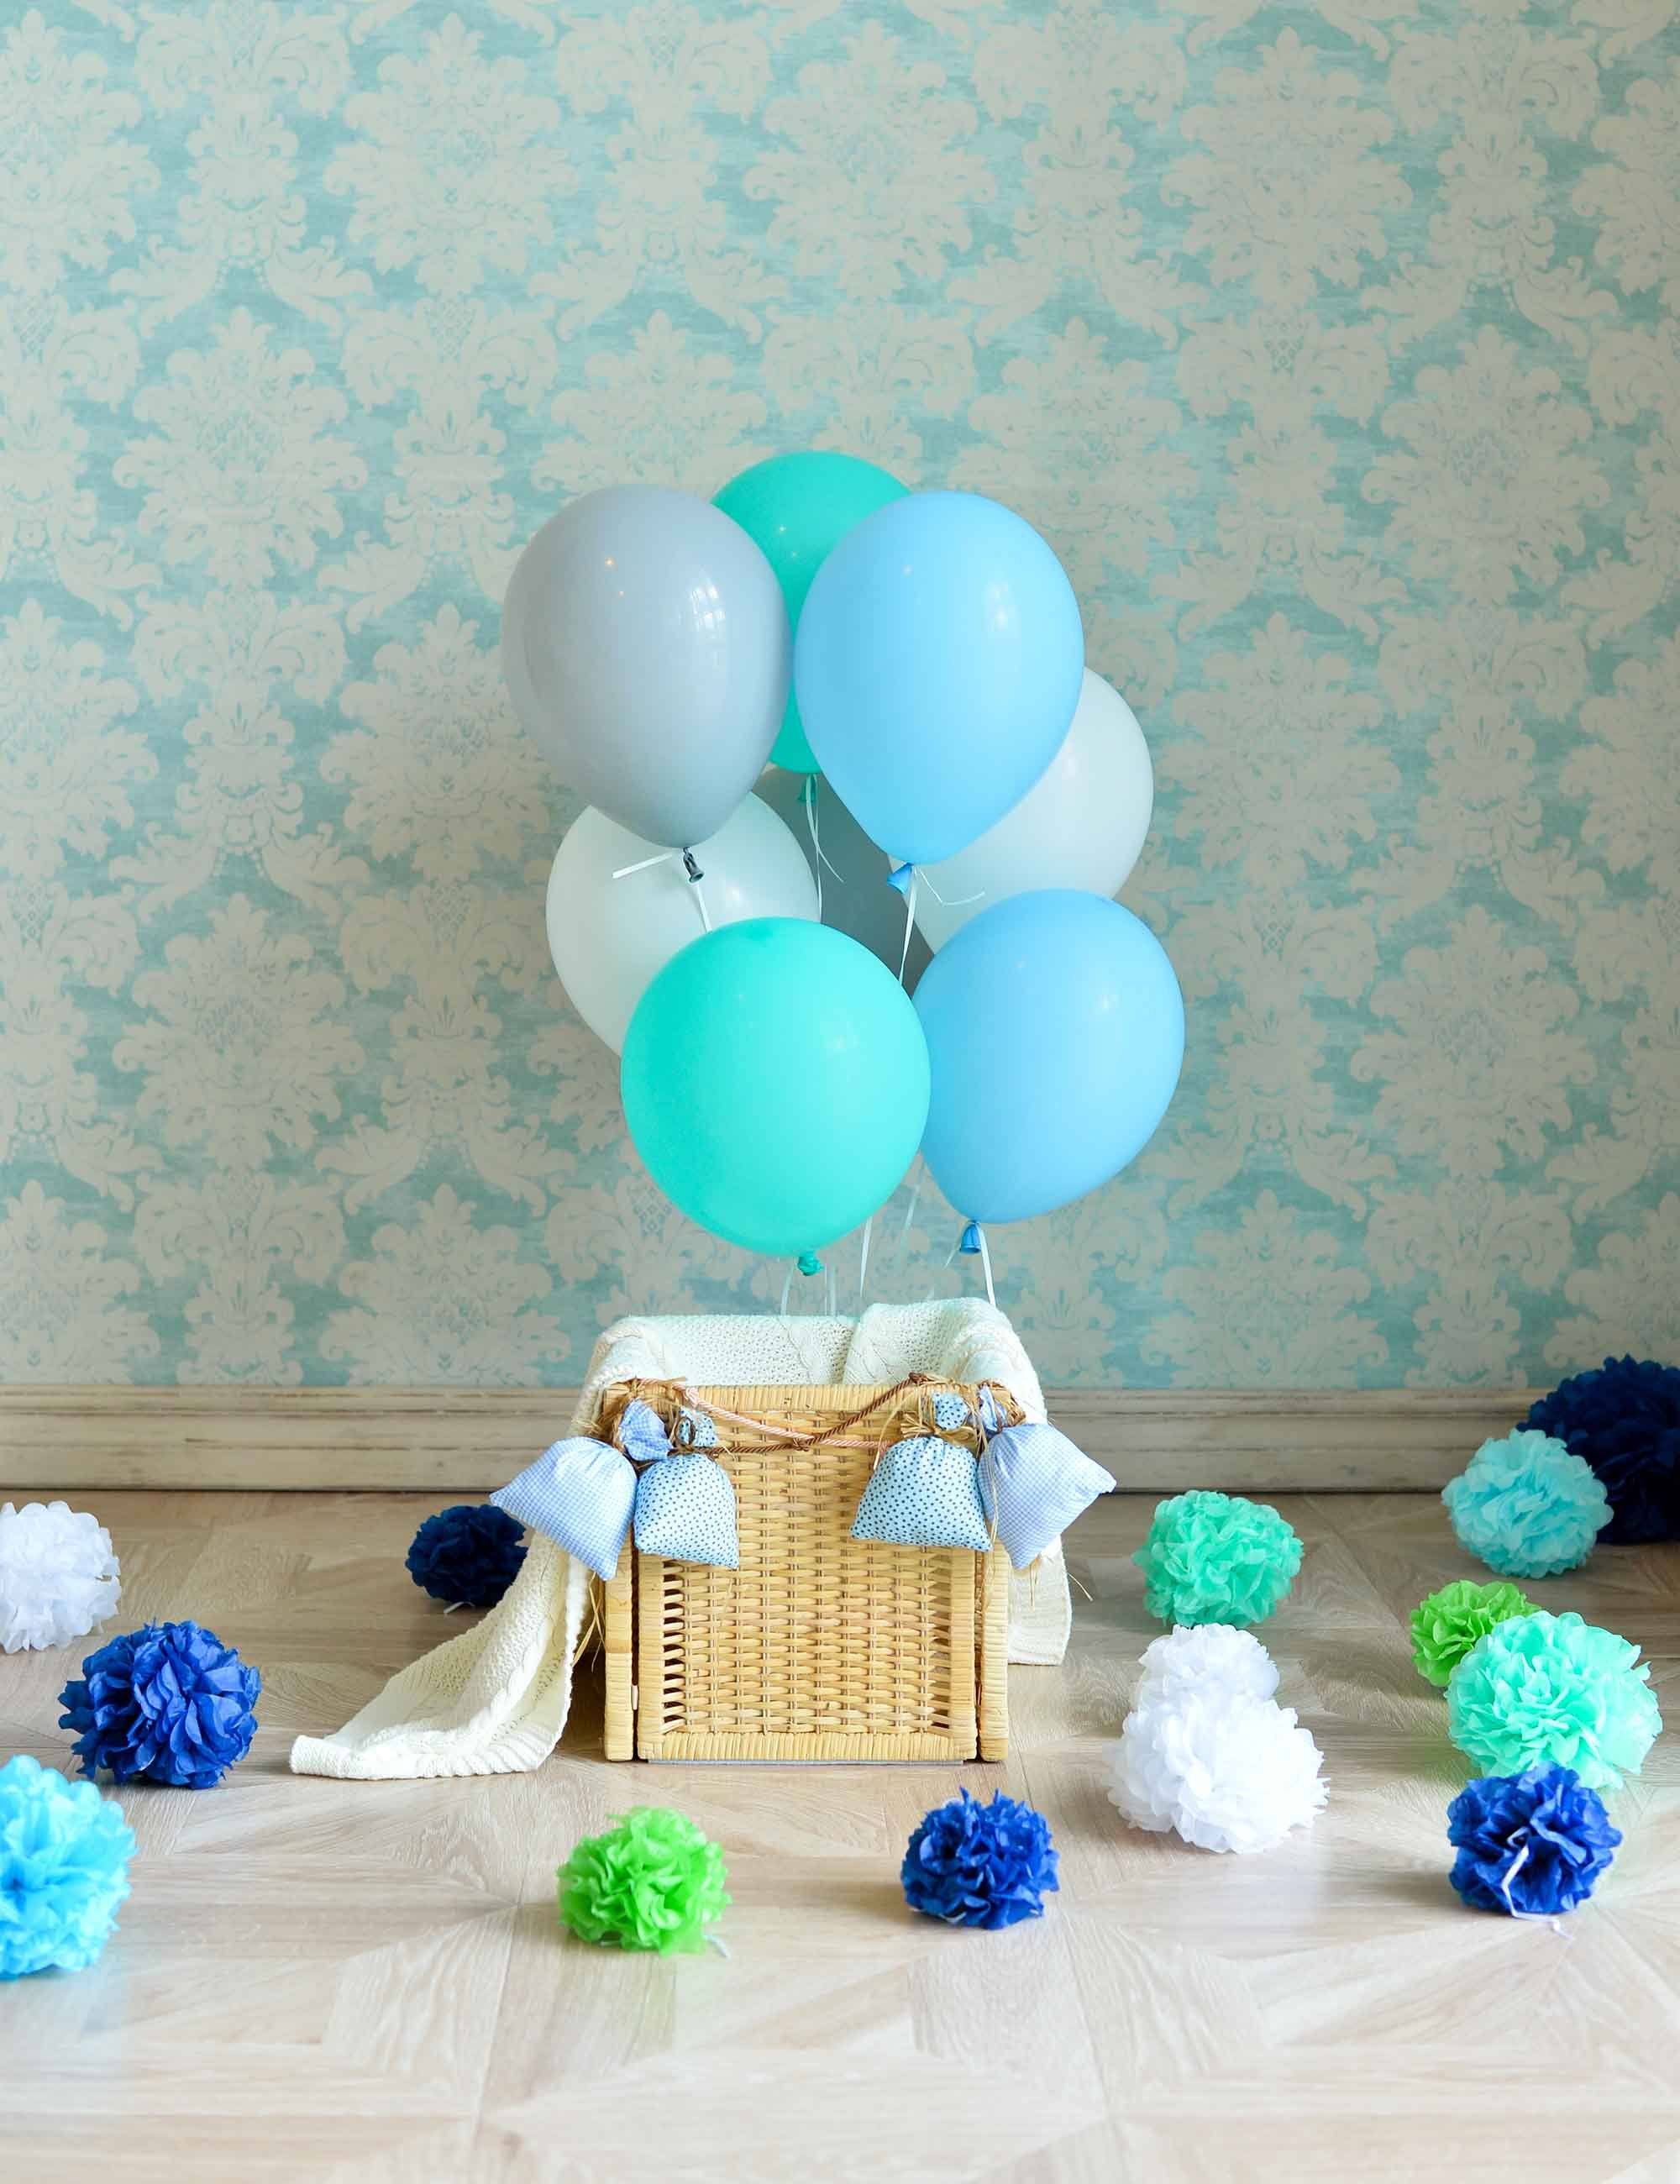 Blue Balloons Before Patterns Wall With Floor For Kid Backdrop For Photography Shopbackdrop